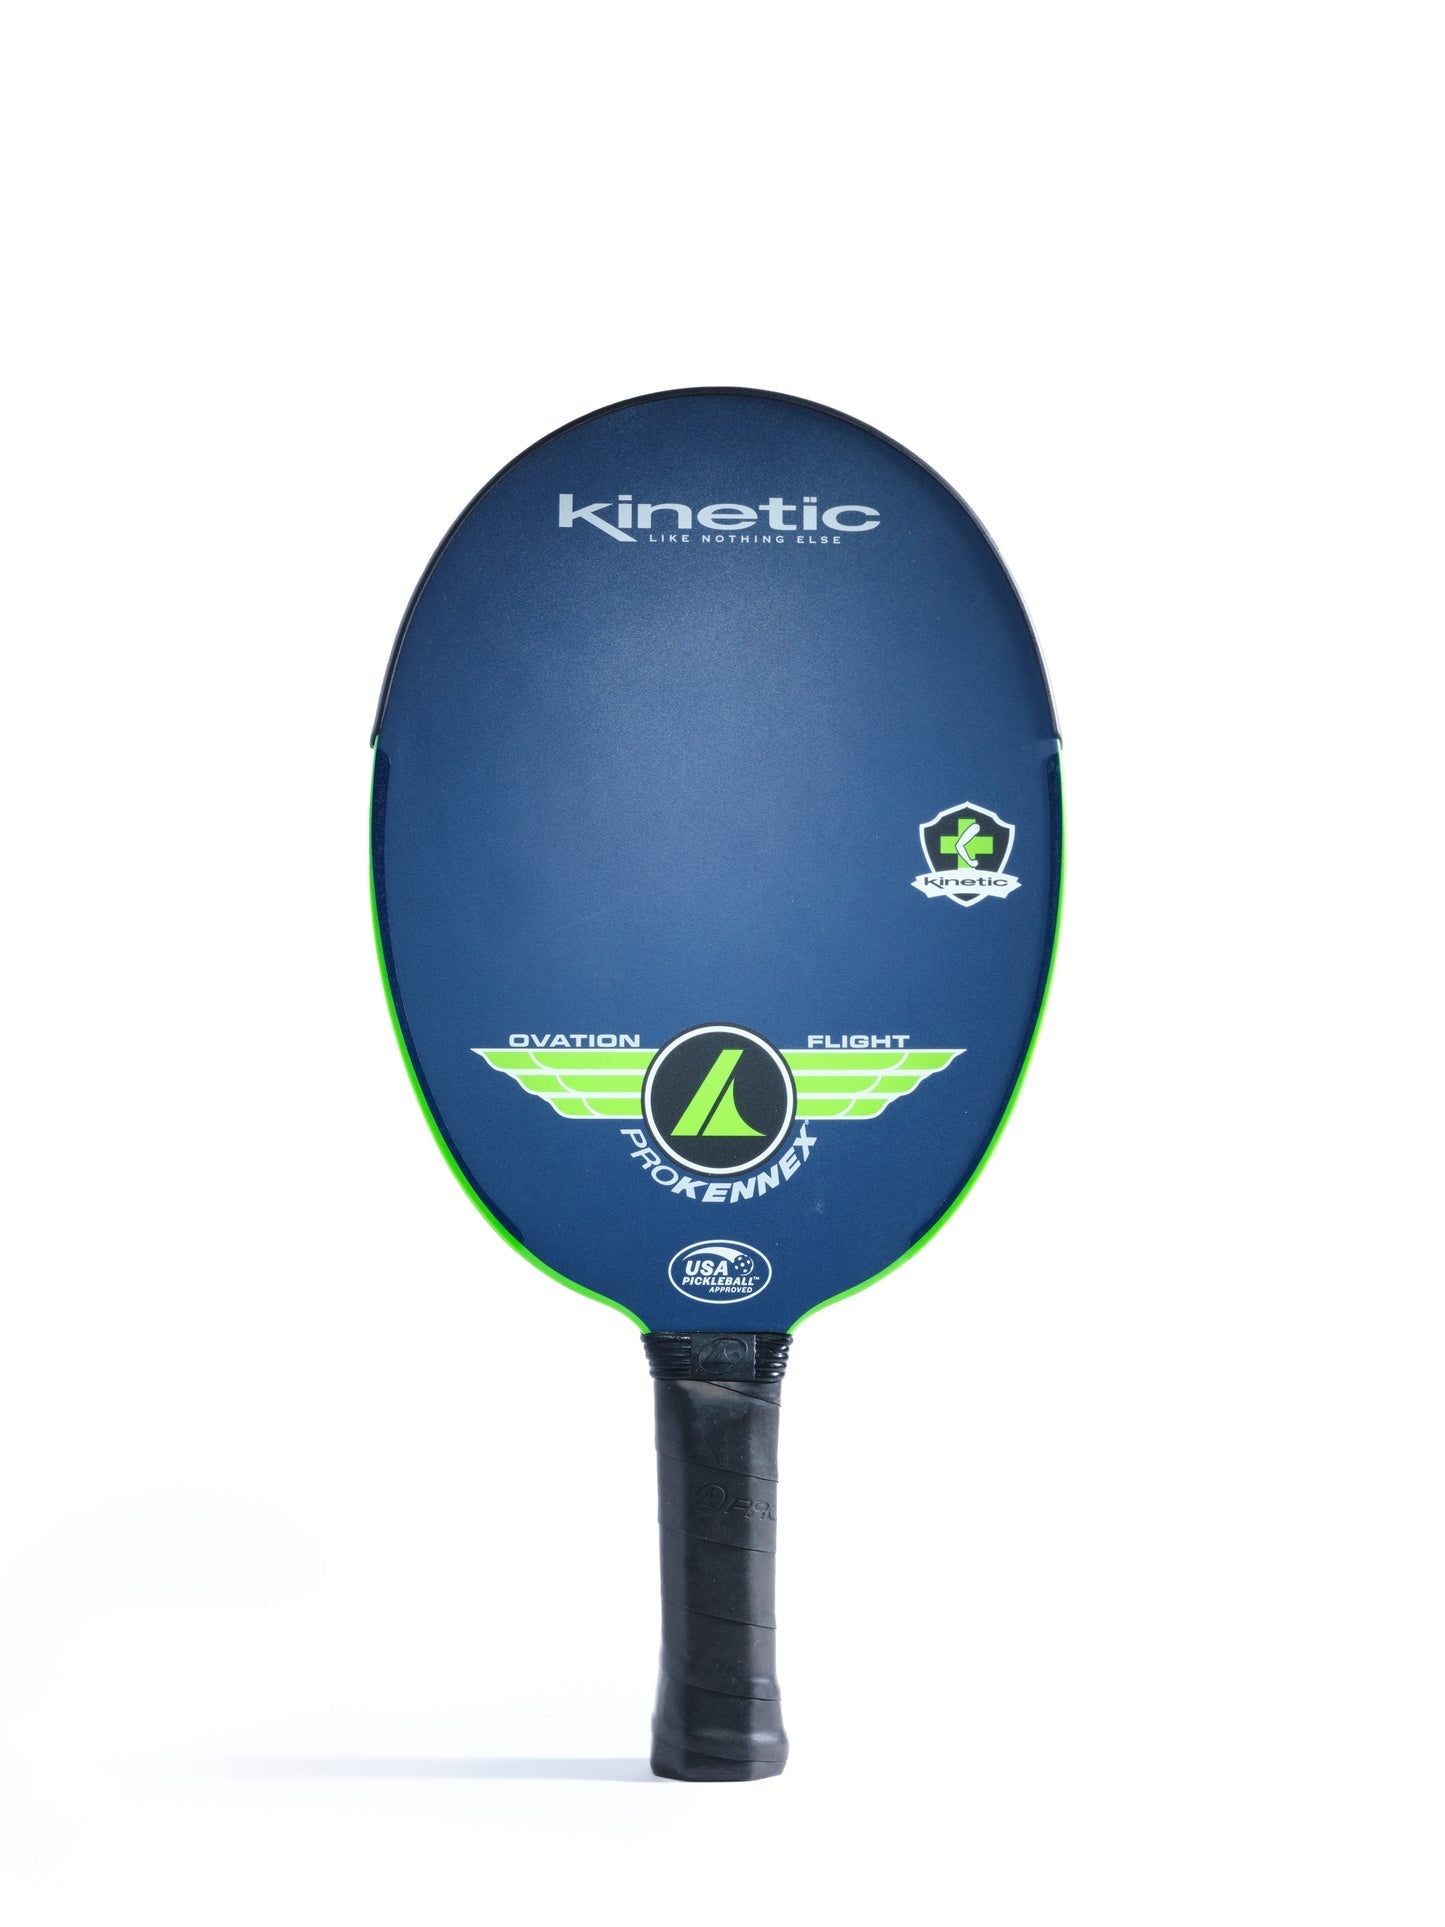 A ProKennex Kinetic Ovation Flight Pickleball Paddle with exceptional maneuverability on a white background.